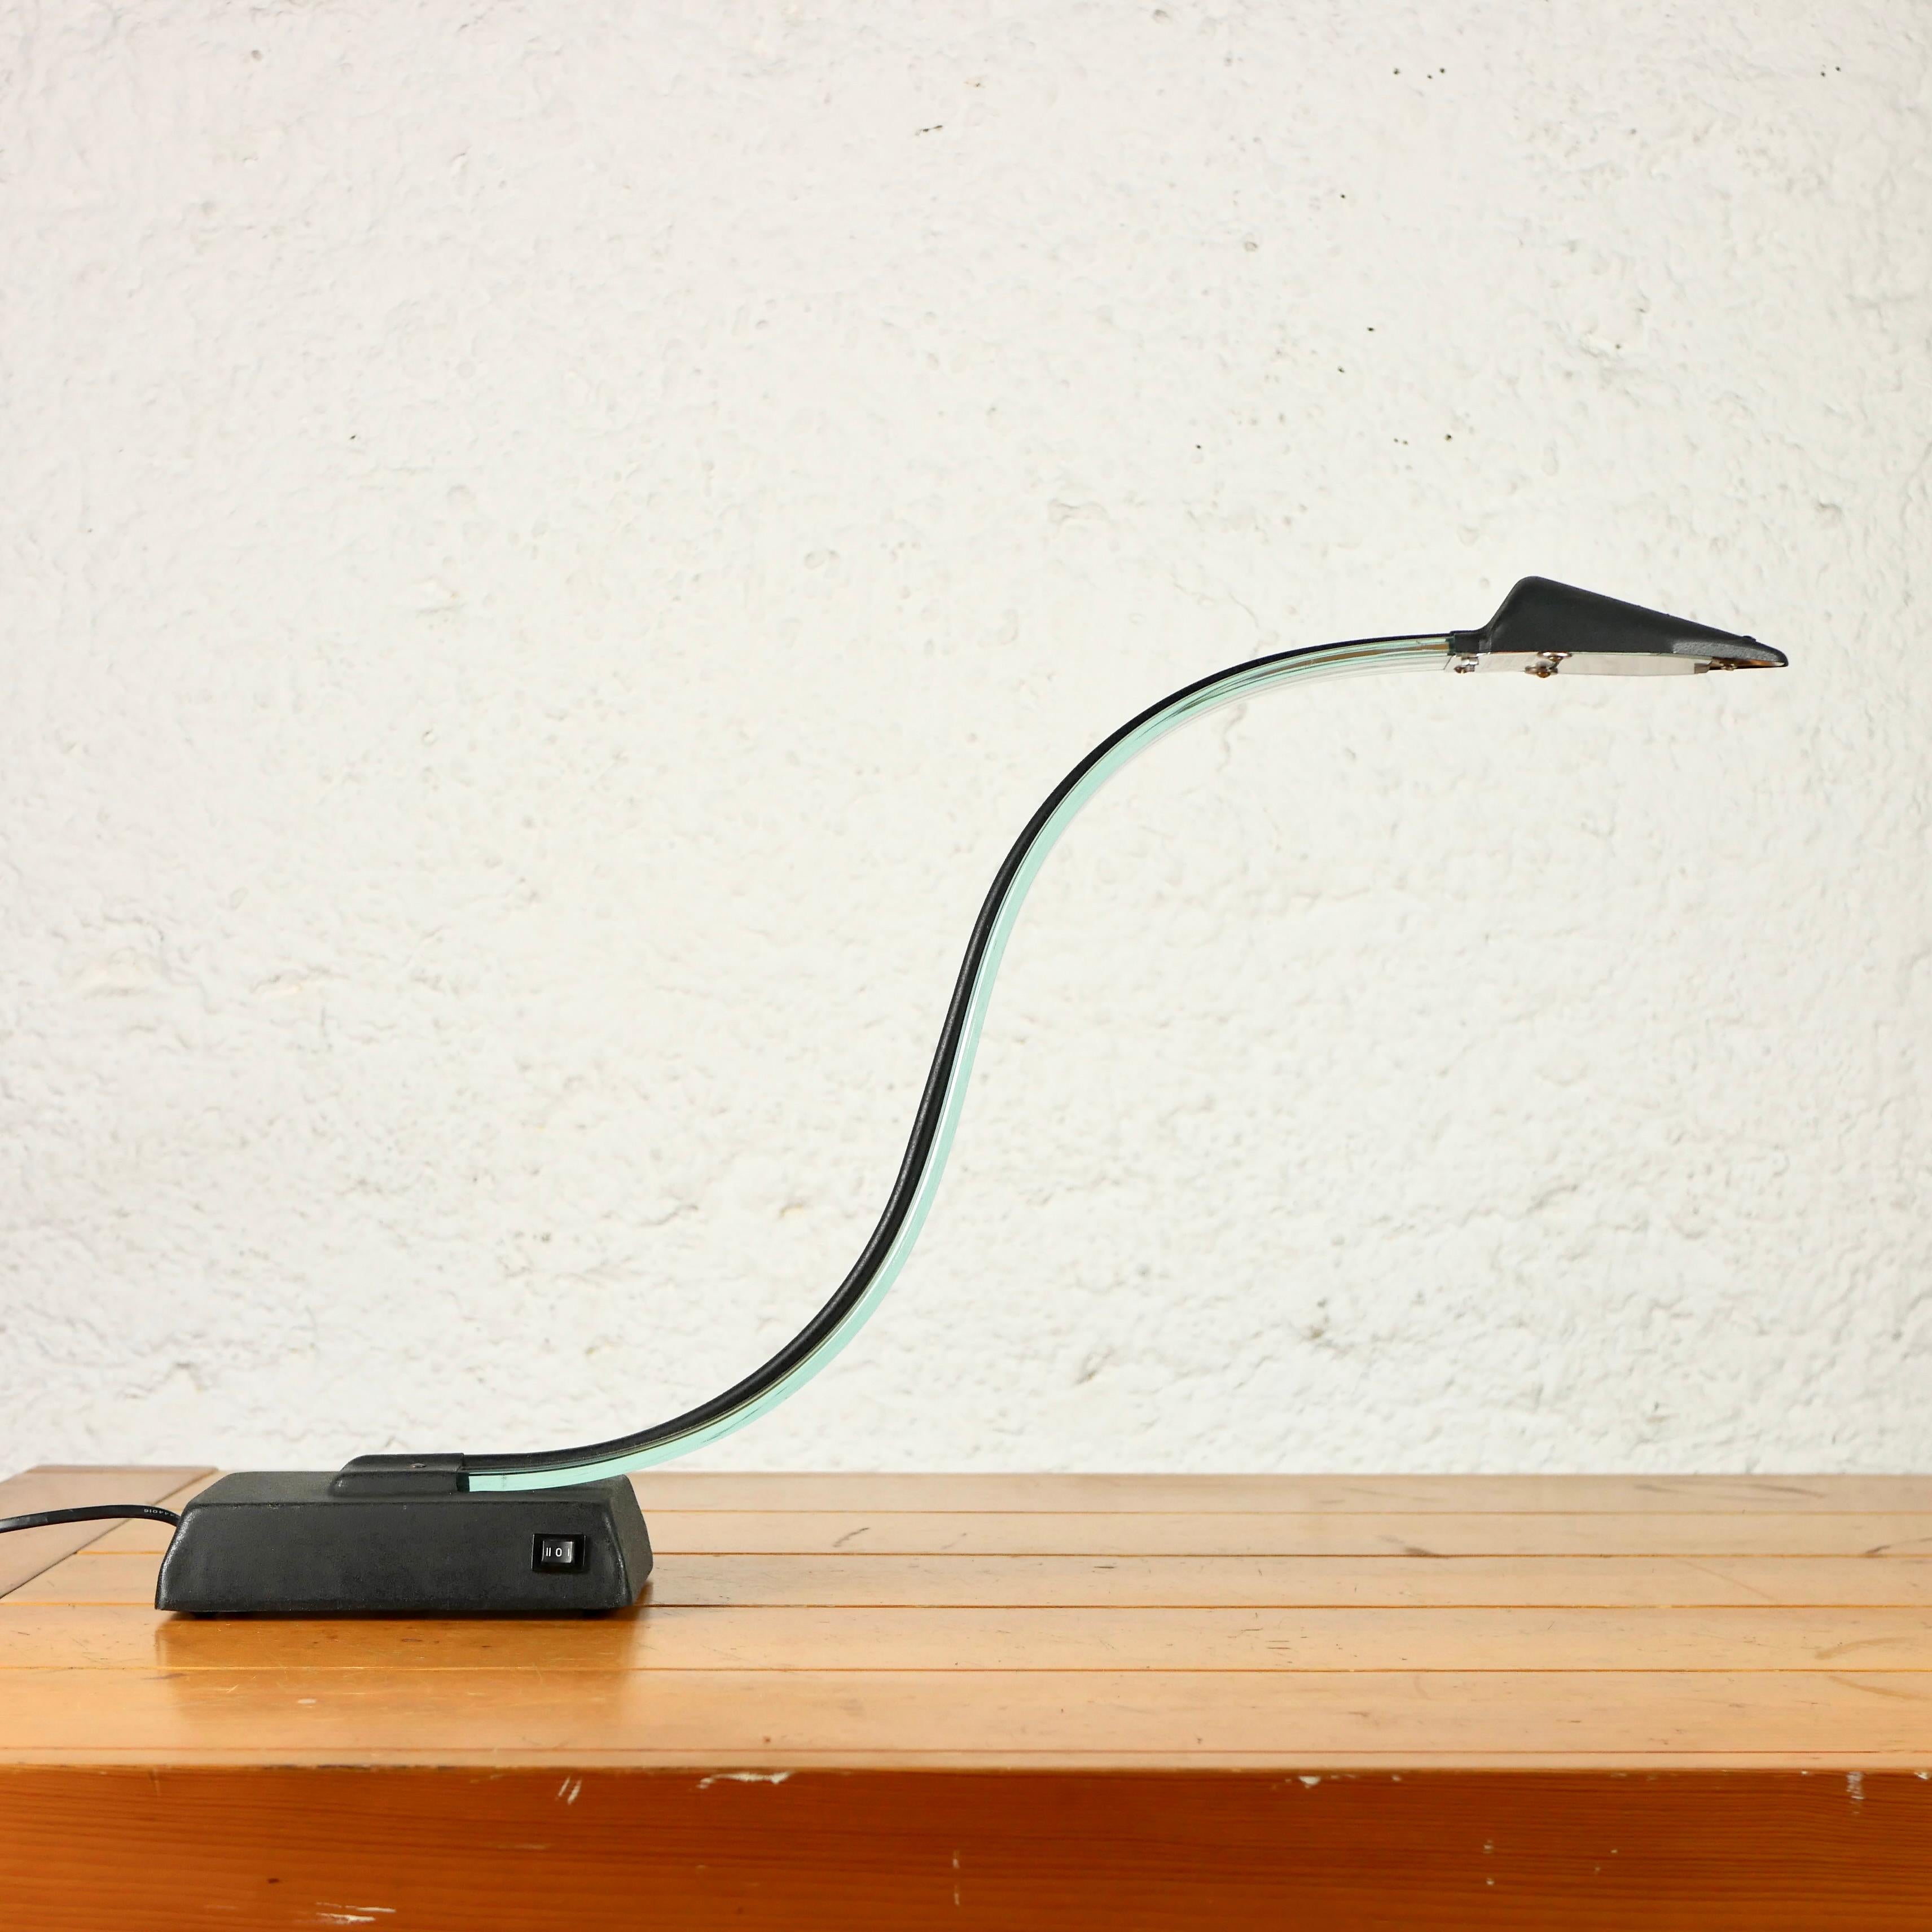 Nice cobra desk lamp made in the 1980s in Taiwan, by Lumijura. Plexiglass and metal.
Post-modern style, it will fit any interior and adds a playful touch to your desk.
Dimensions : H42cm, W64cm, D12cm
Good condition overall.